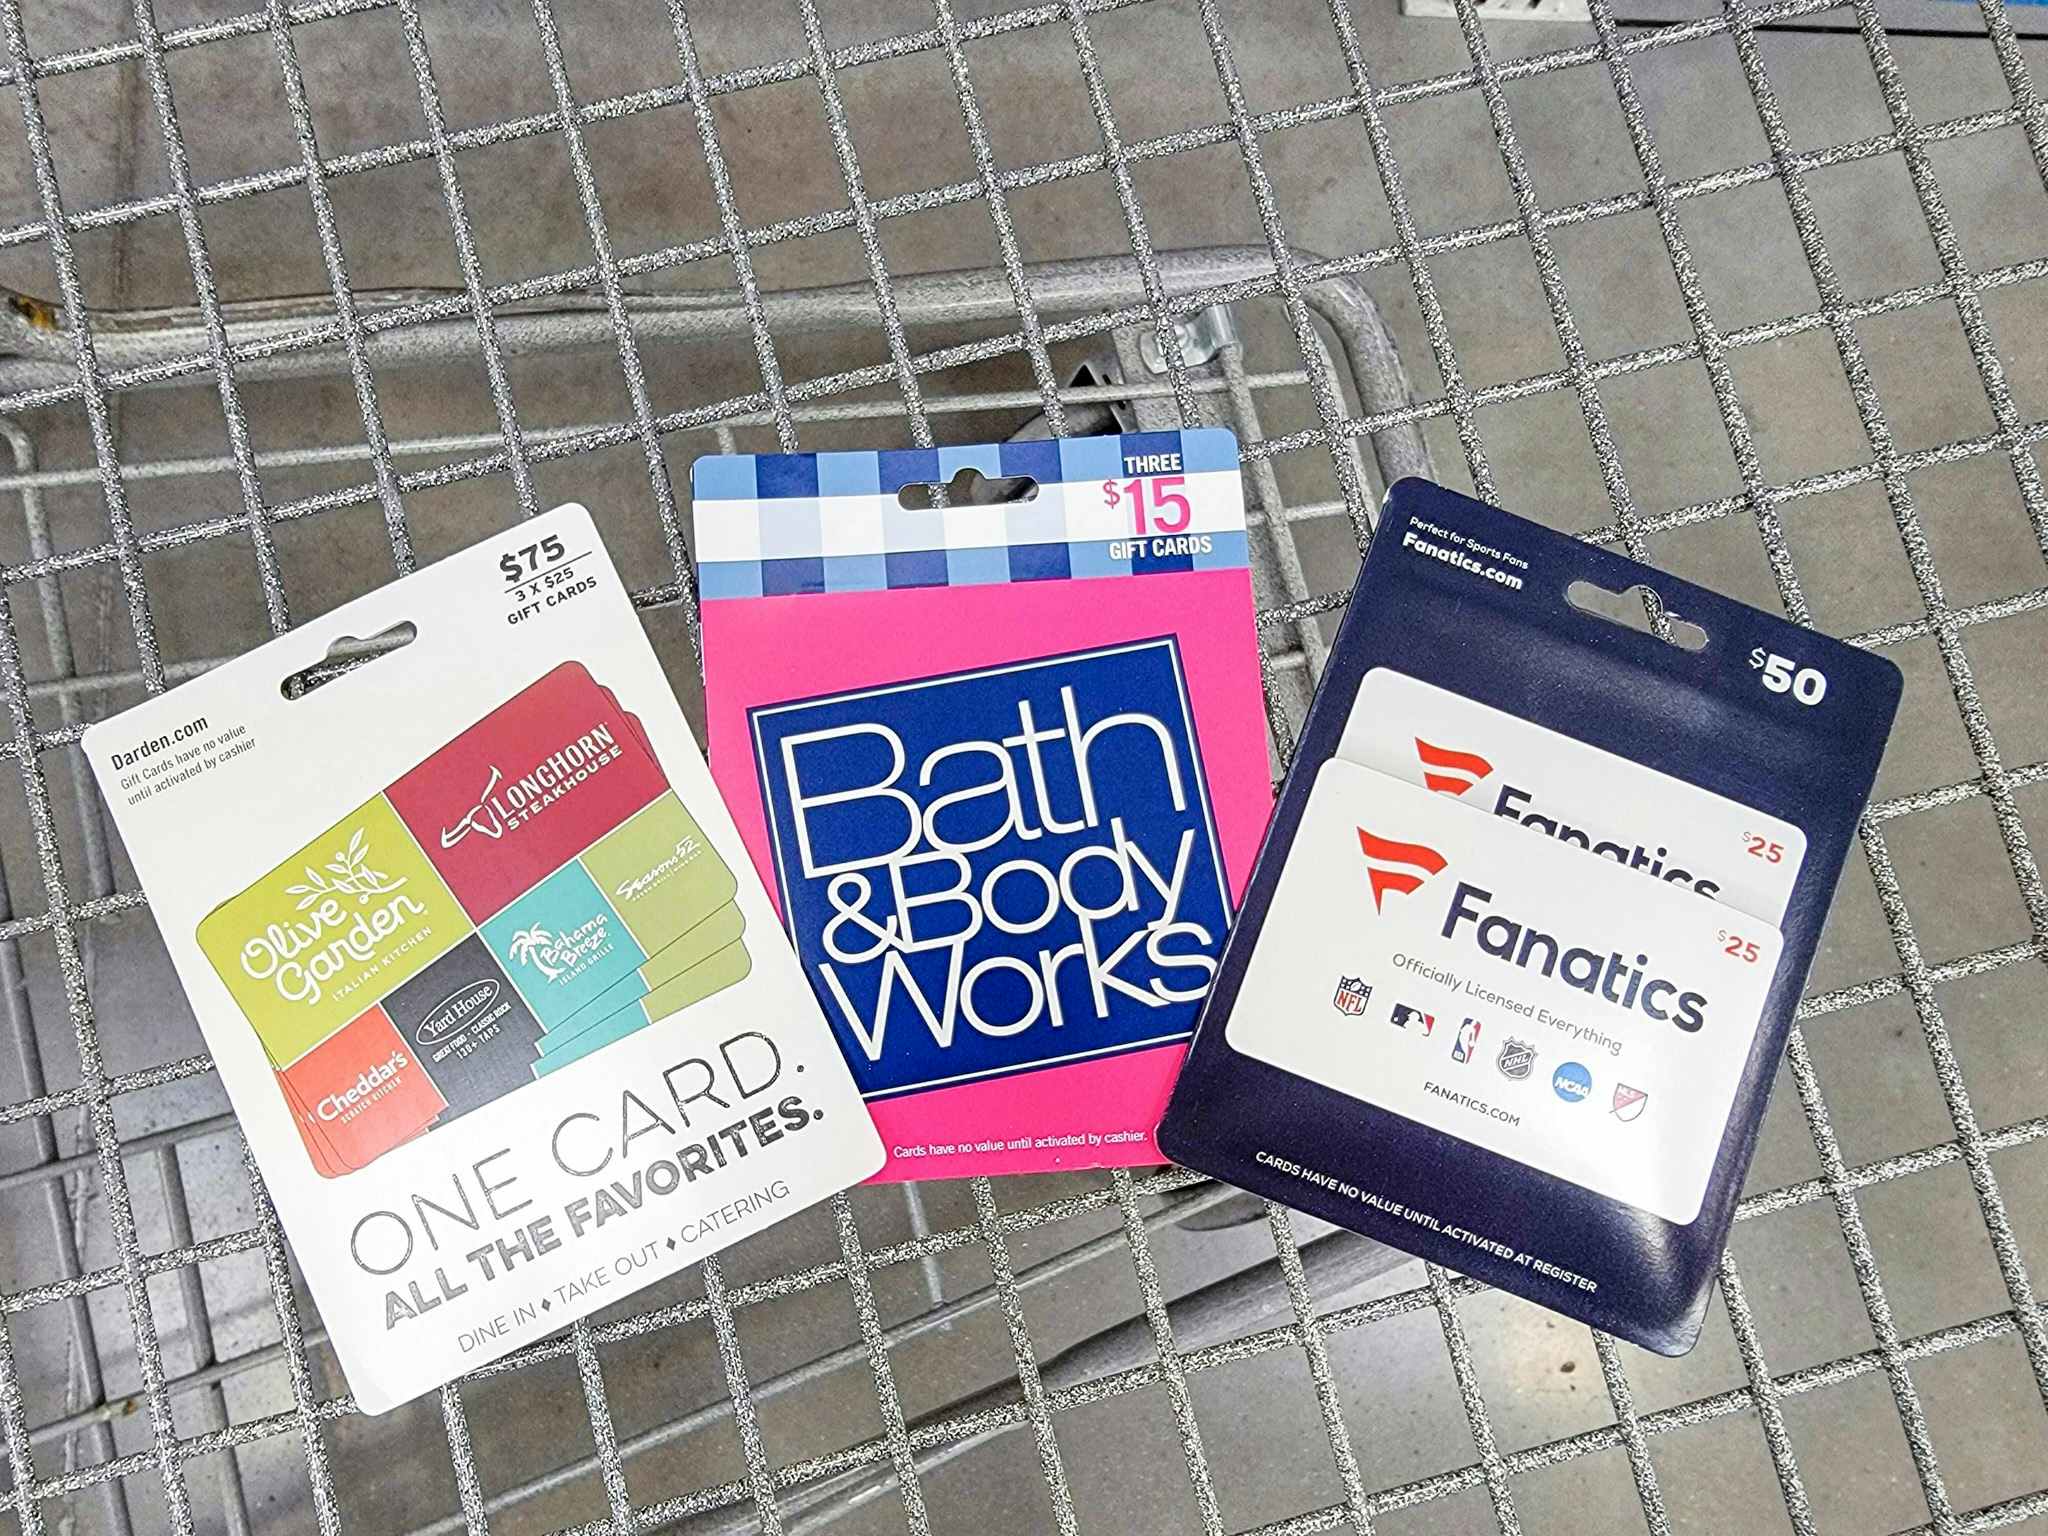 gift cards for darden restaurants, bath and body works, and fanatics